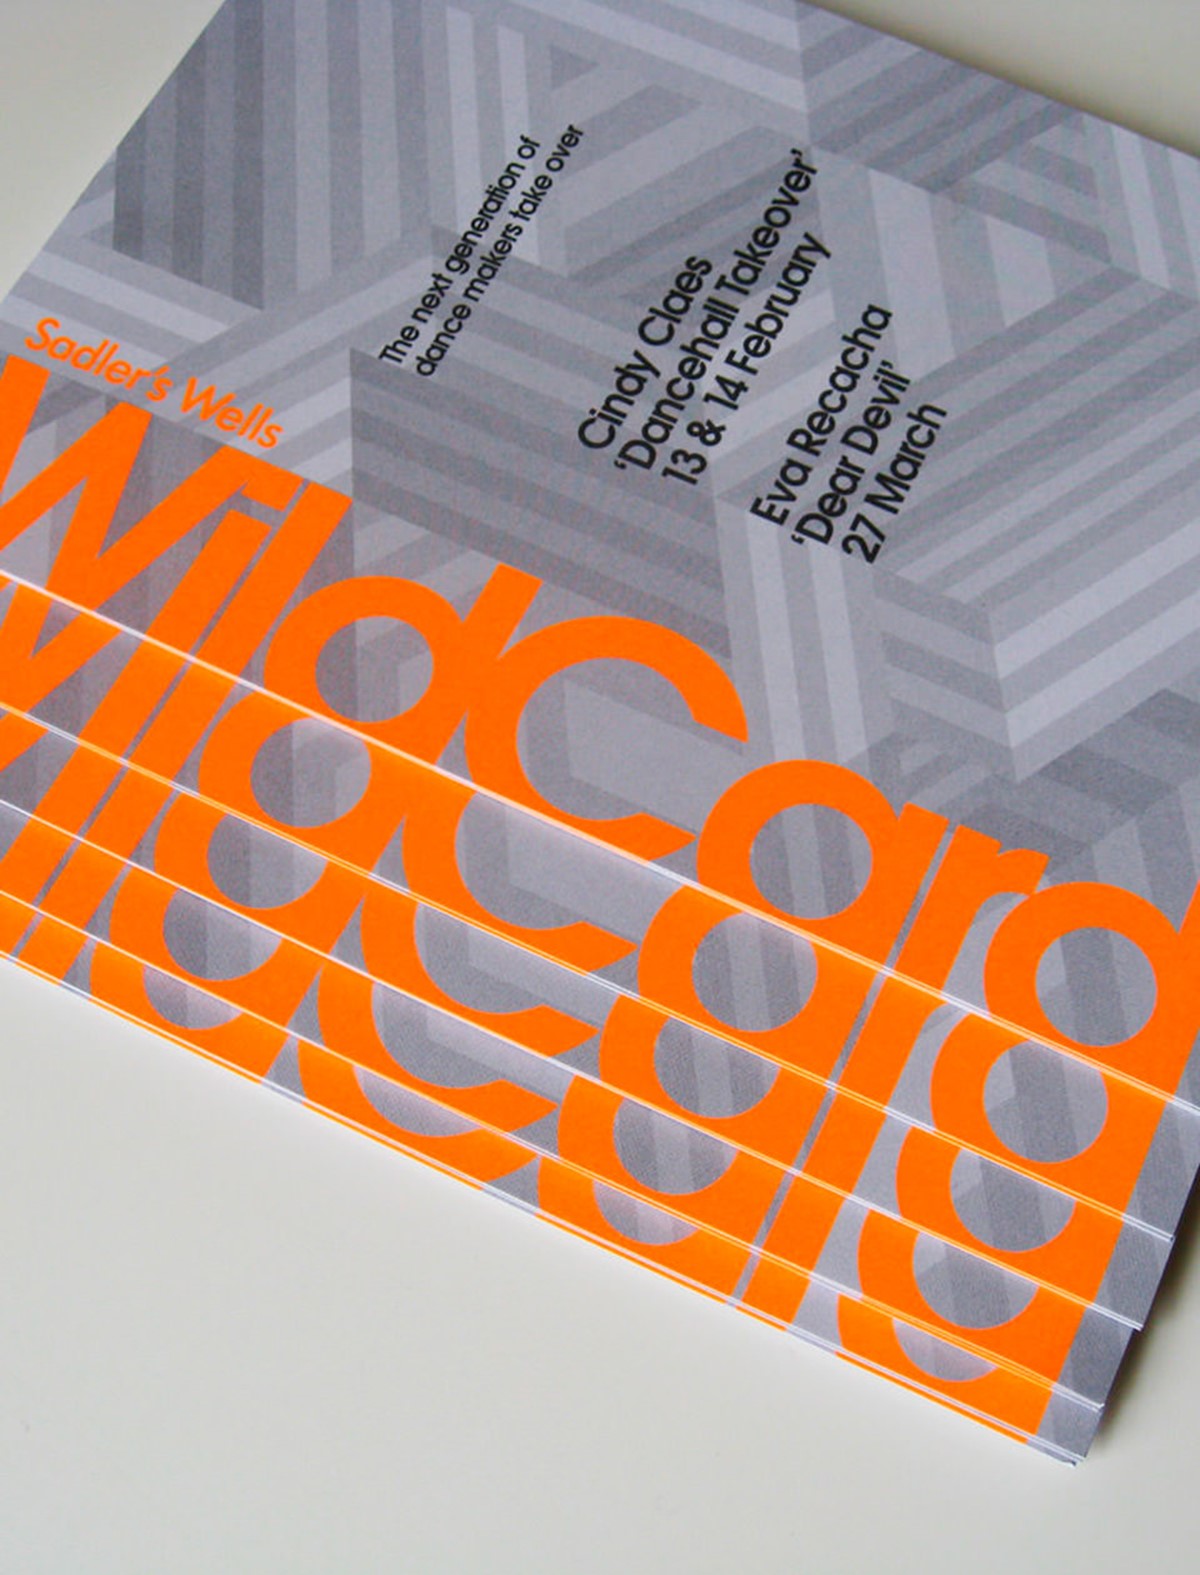 Sadler's Wells. Wildcard season 2. Neon flyers piled. Identity and design by Superfried. Manchester.